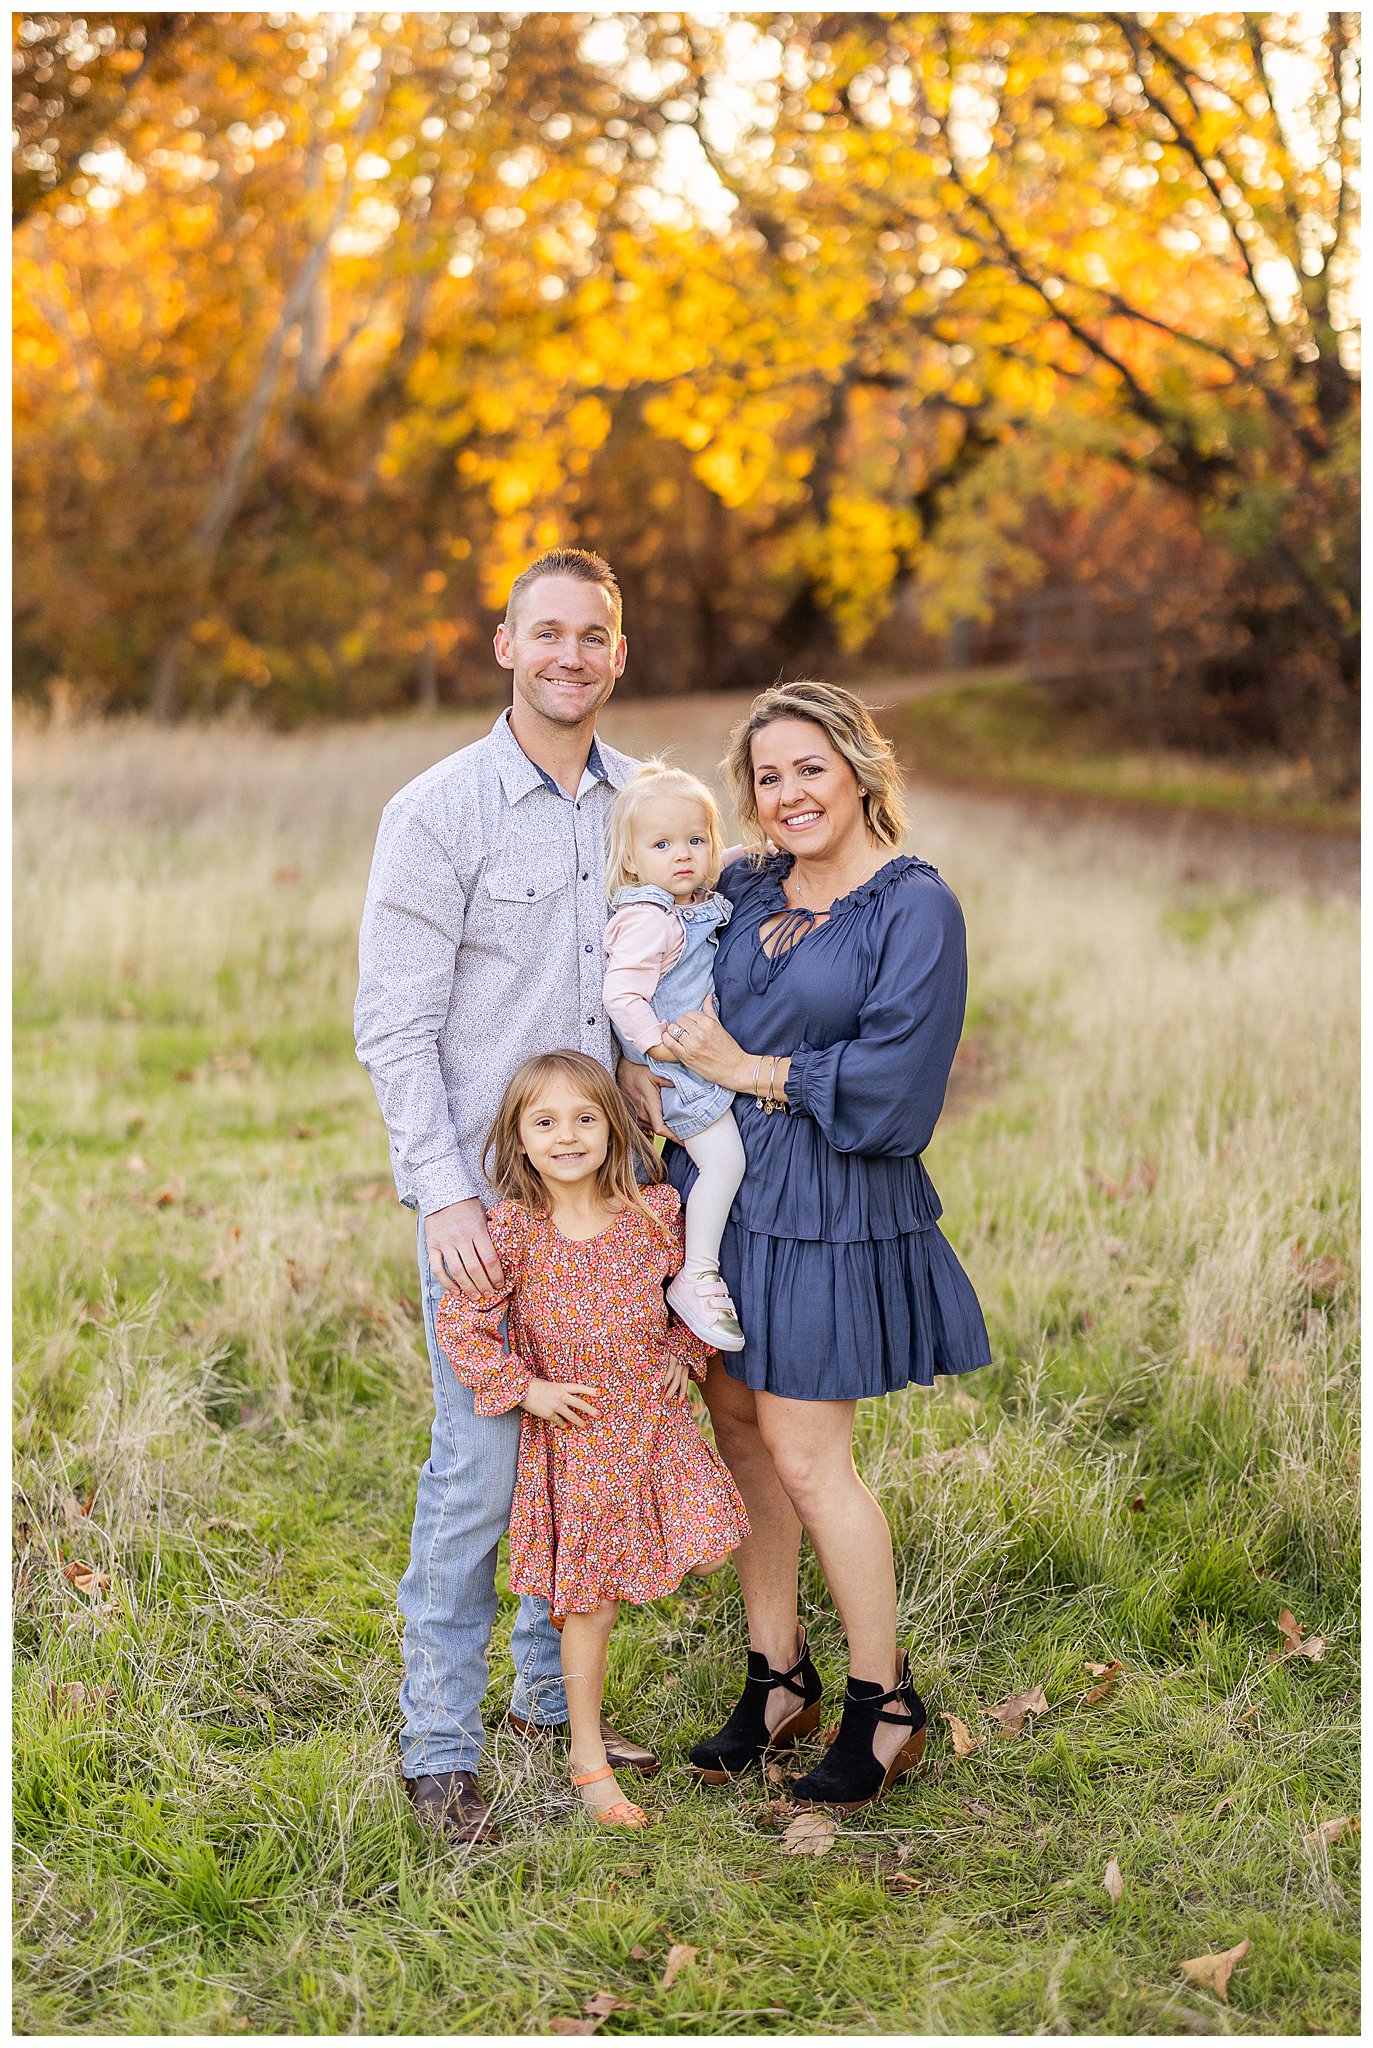 Family Session in Upper Bidwell Park with Yellow Fall Leaves | Jenna + Corey